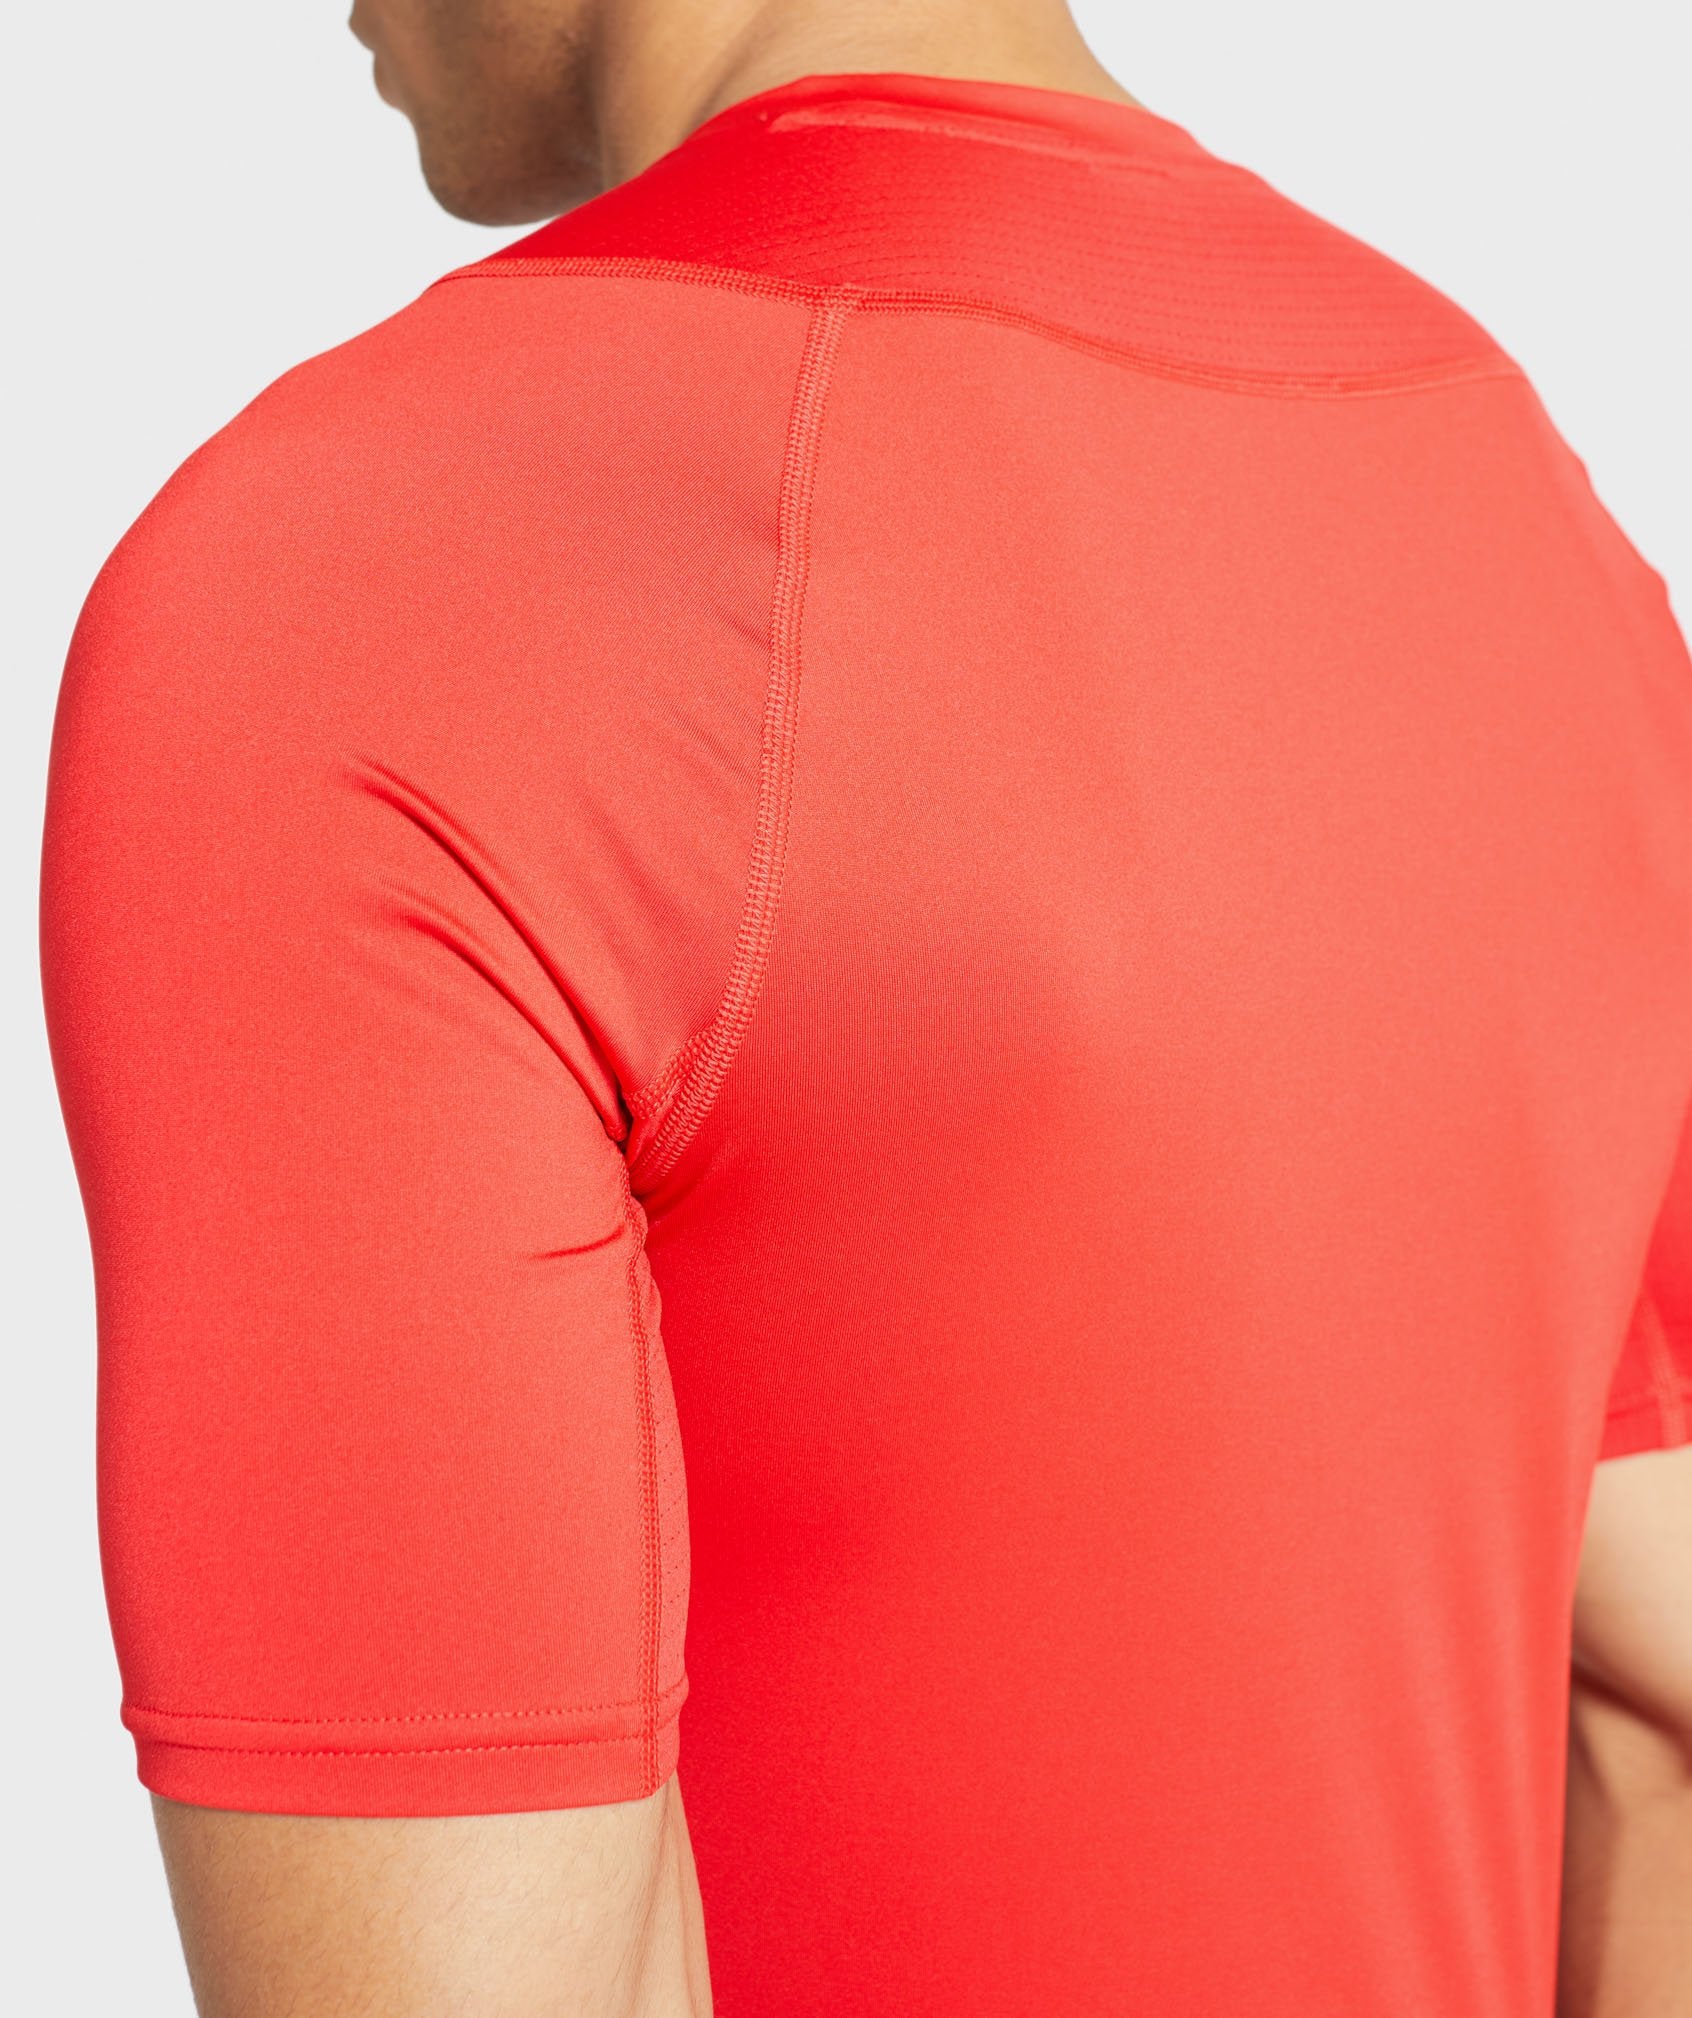 Element Baselayer T-Shirt in Red - view 6